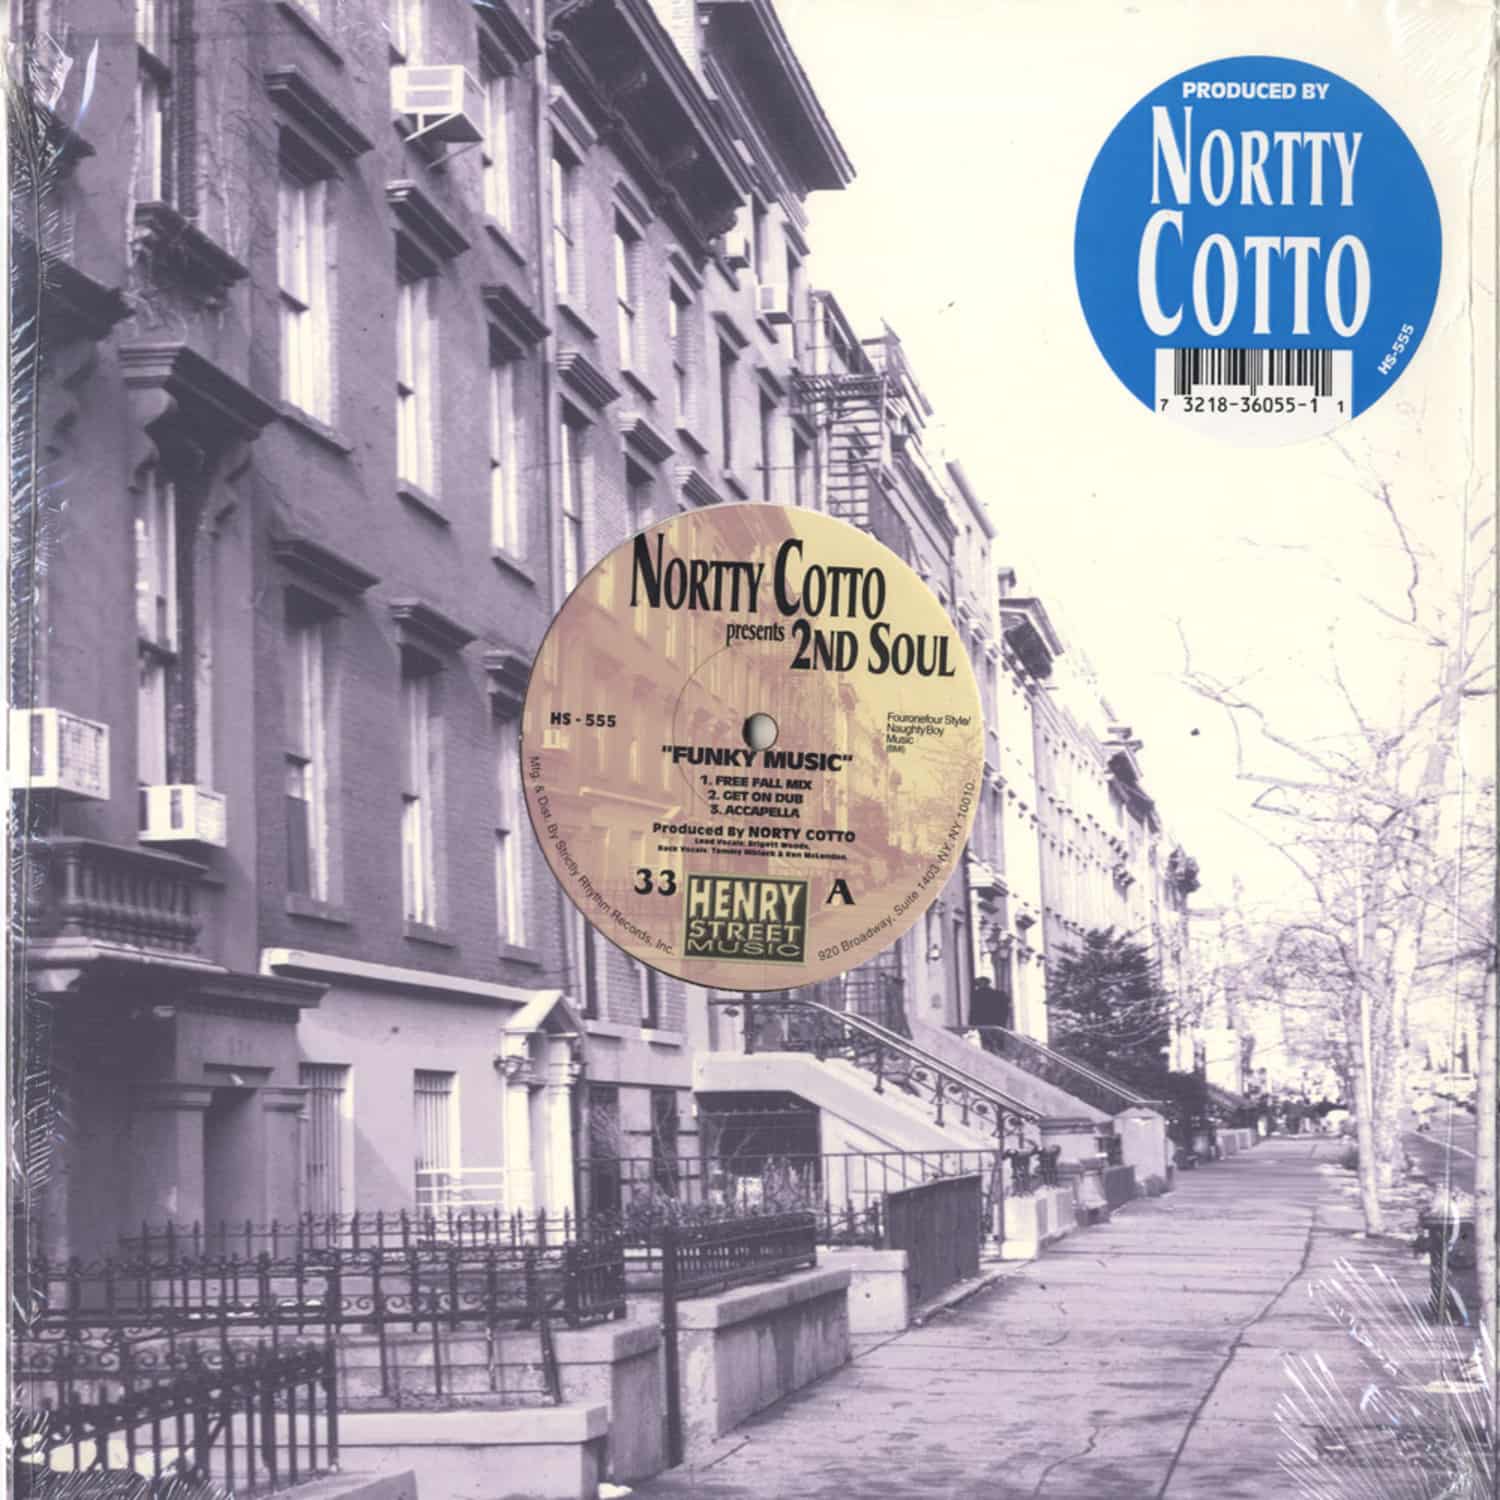 Norty Cotto - PRES.2ND SOUL:FUNKY MUSIC